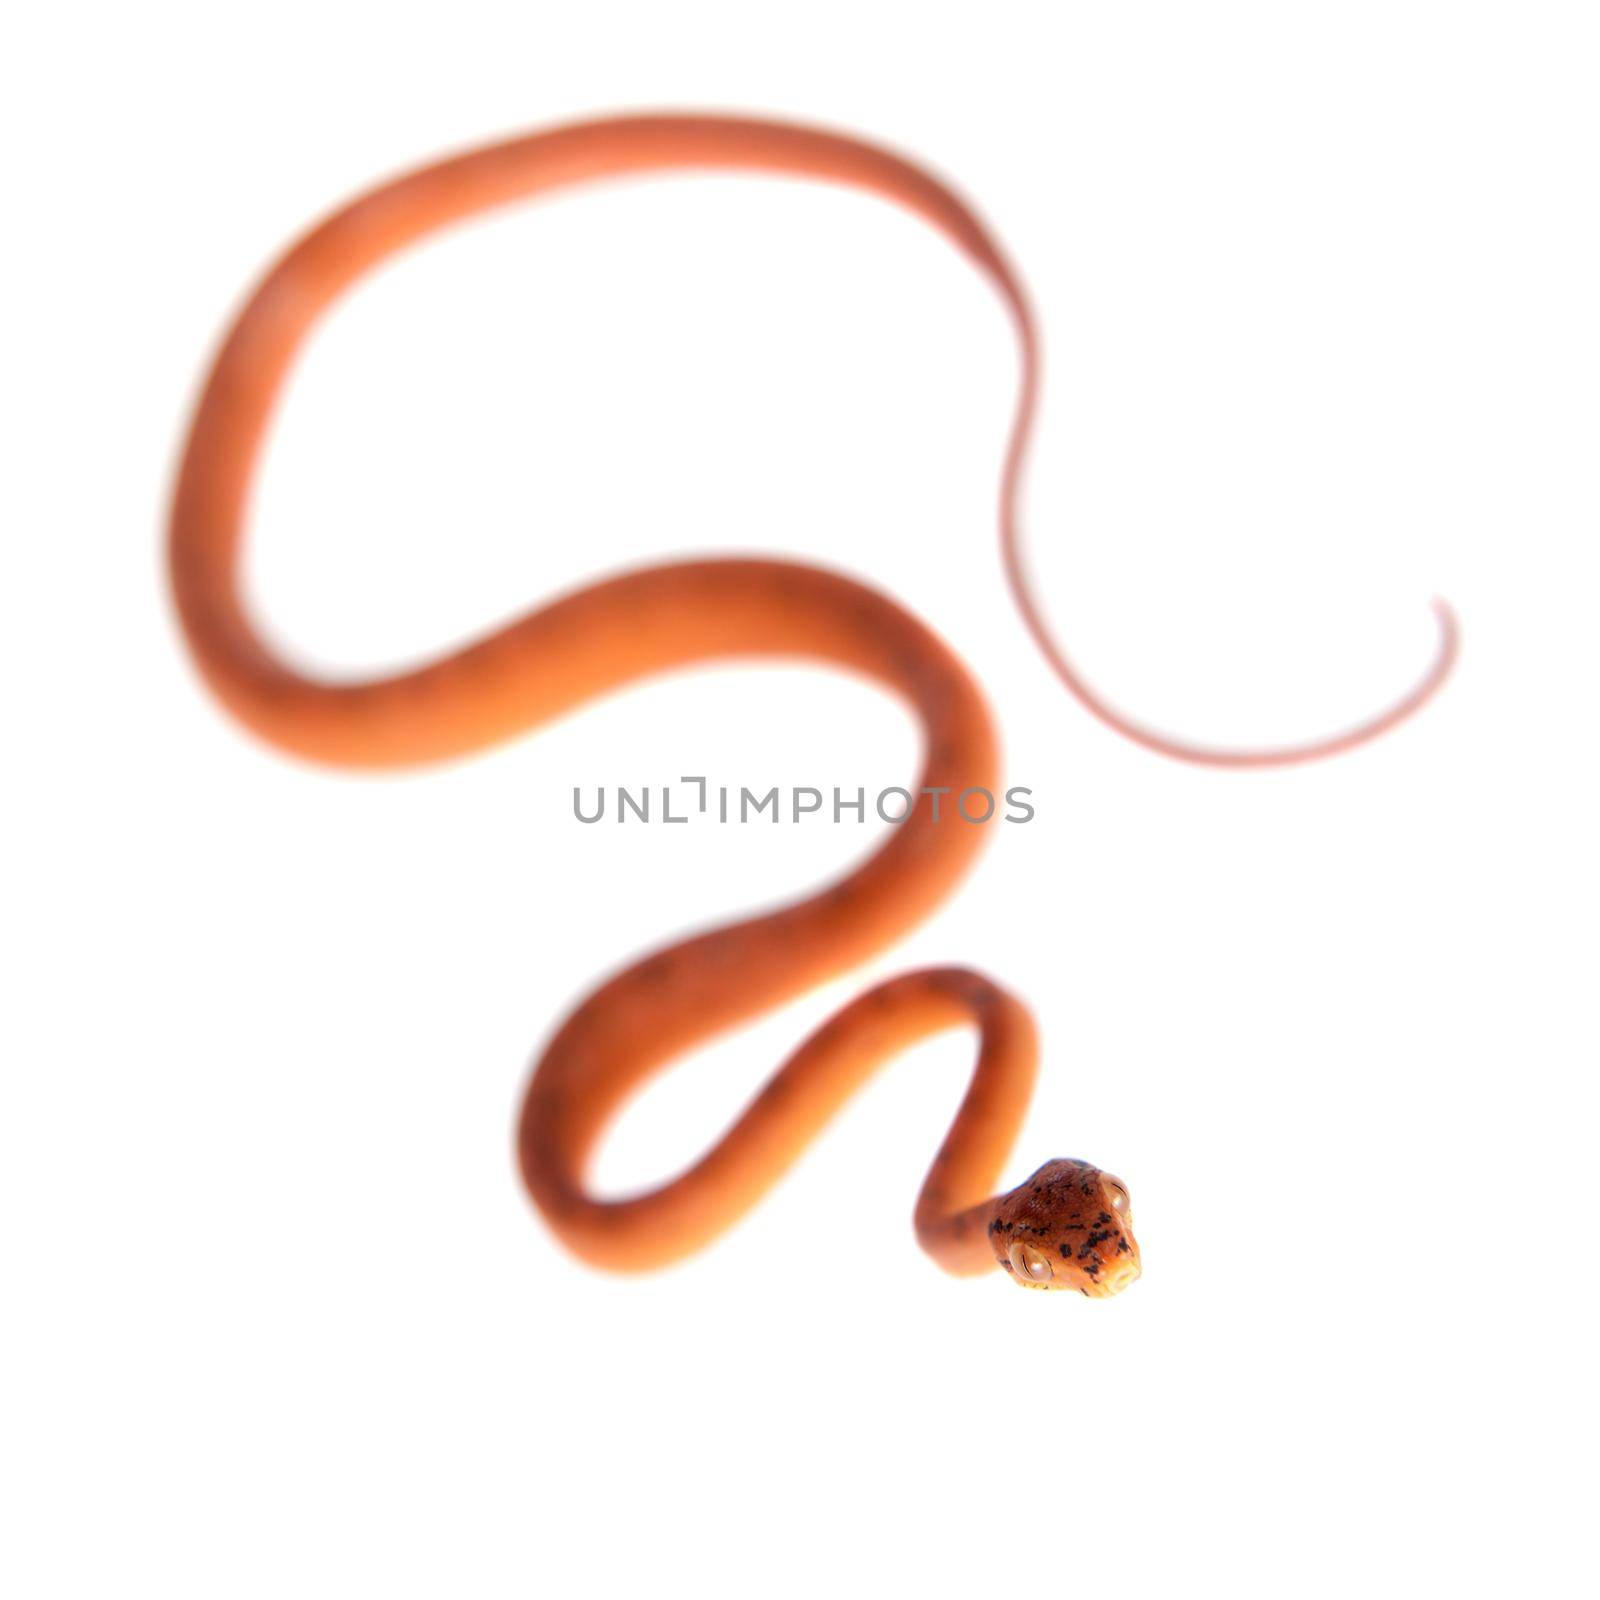 Red Amazon tree boa, 7 days old, isolated on white by RosaJay